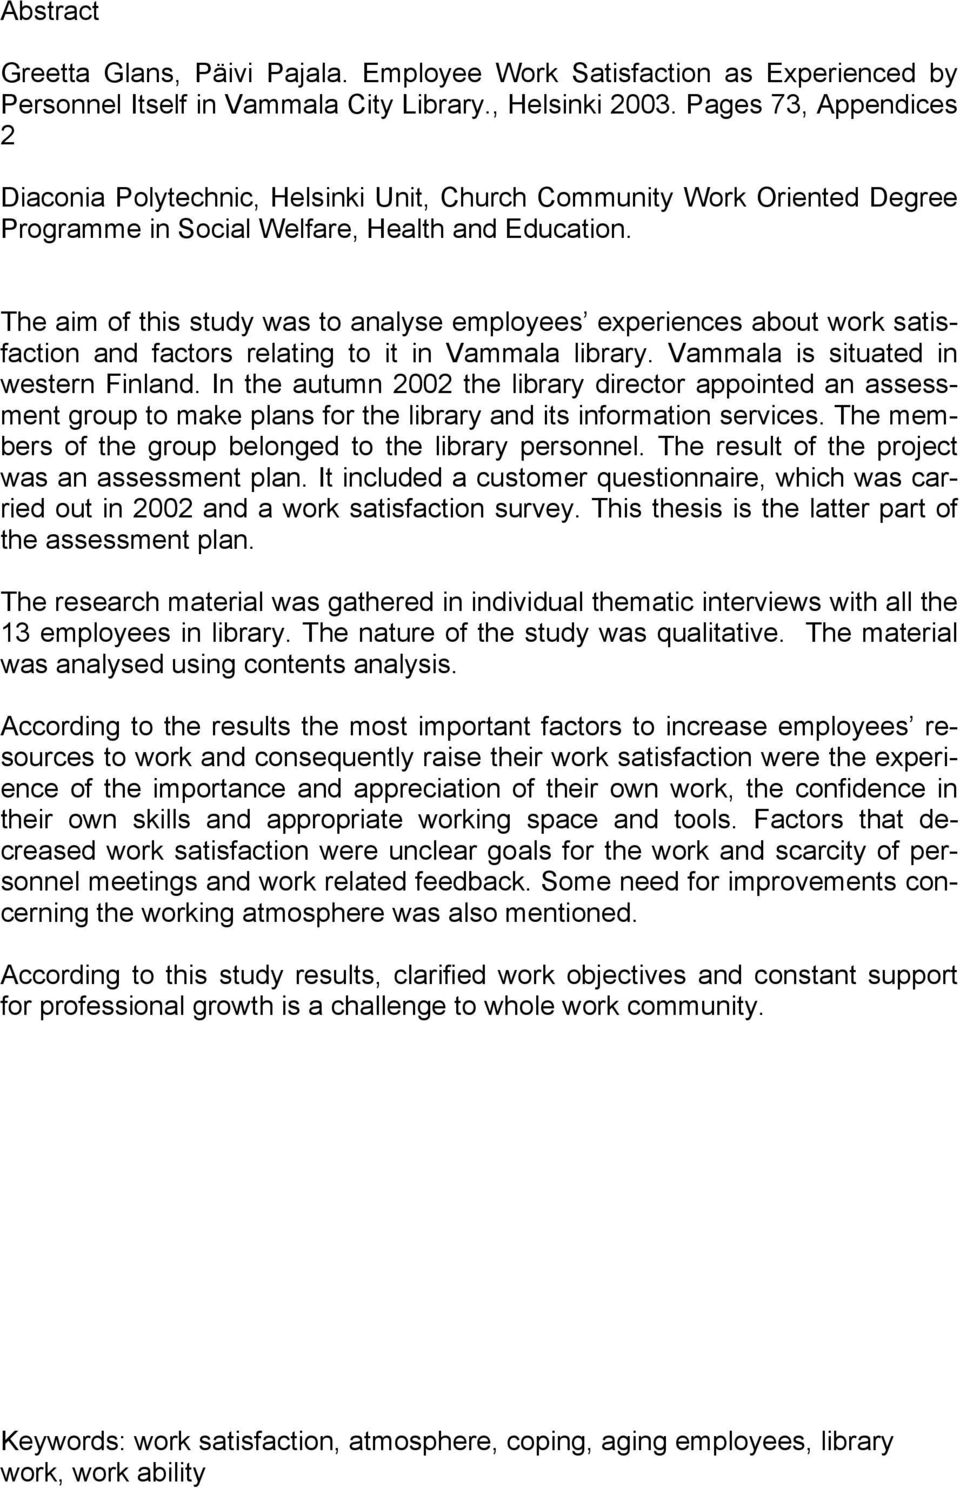 The aim of this study was to analyse employees experiences about work satisfaction and factors relating to it in Vammala library. Vammala is situated in western Finland.